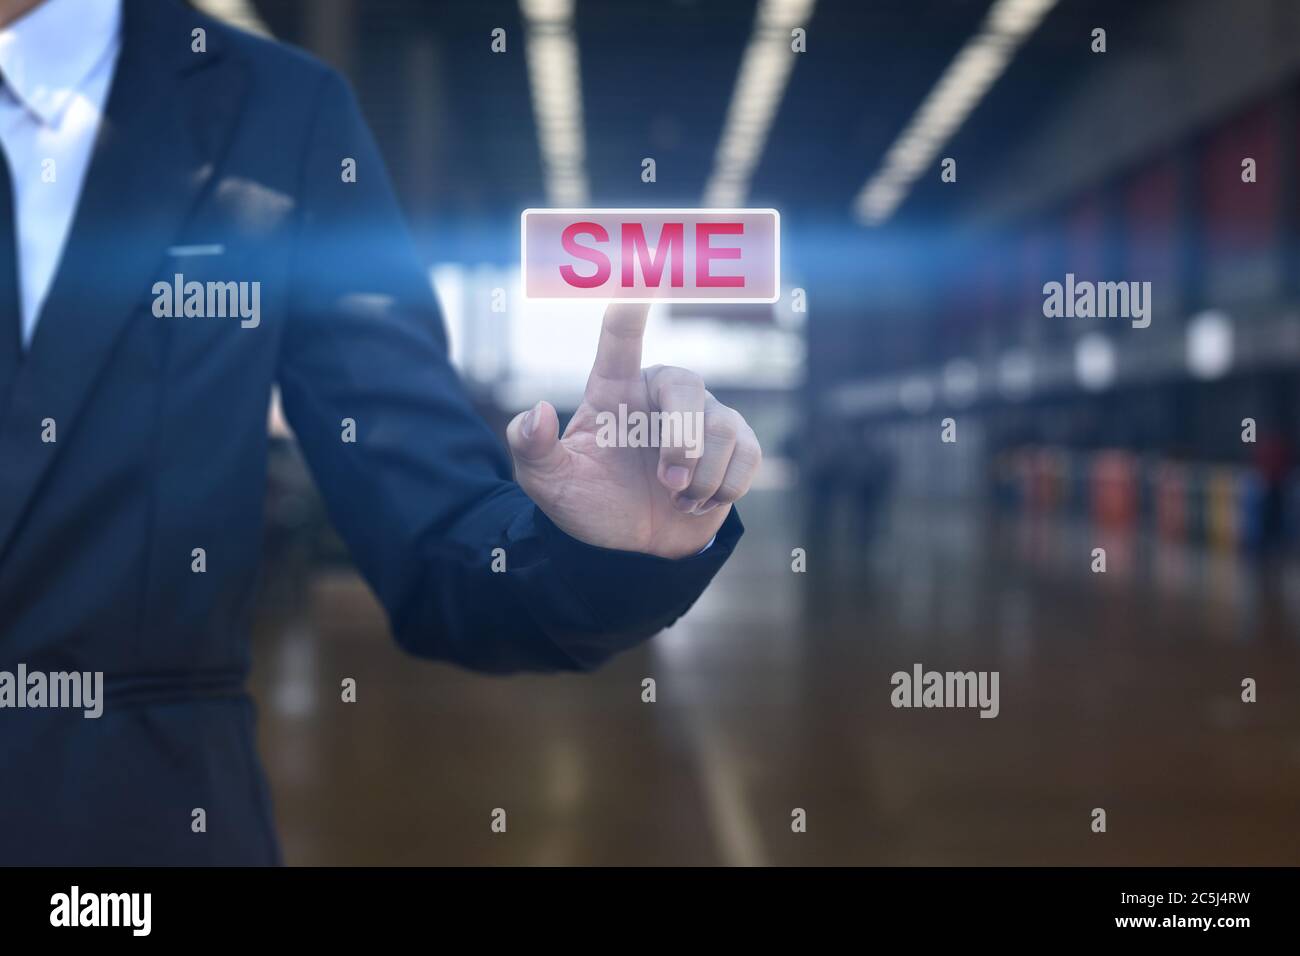 Businessman hand pressing button SME icon. Concept of small and medium-sized enterprises business. Stock Photo